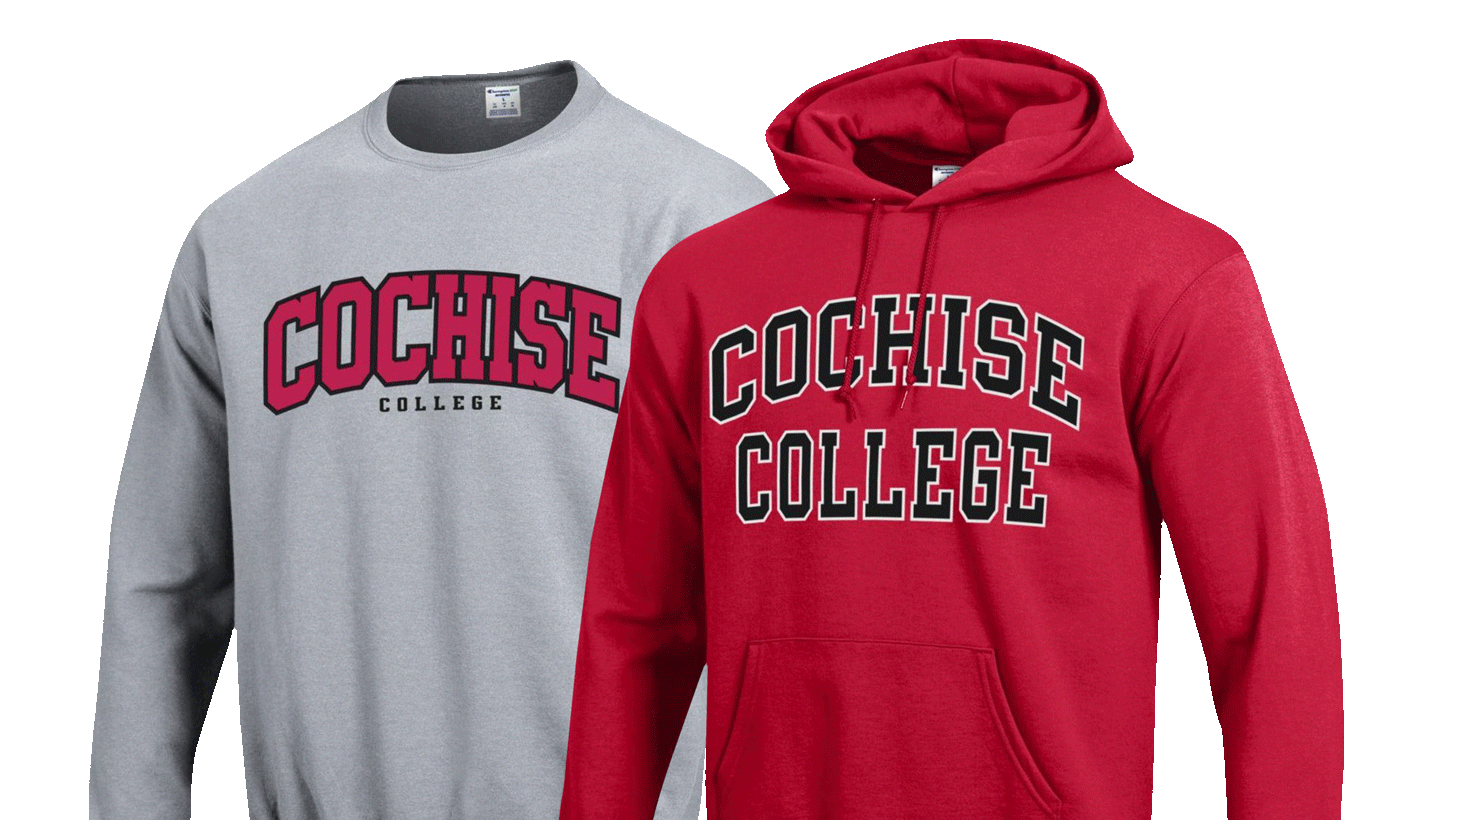 Cochise College Campus Store Apparel, Merchandise, & Gifts